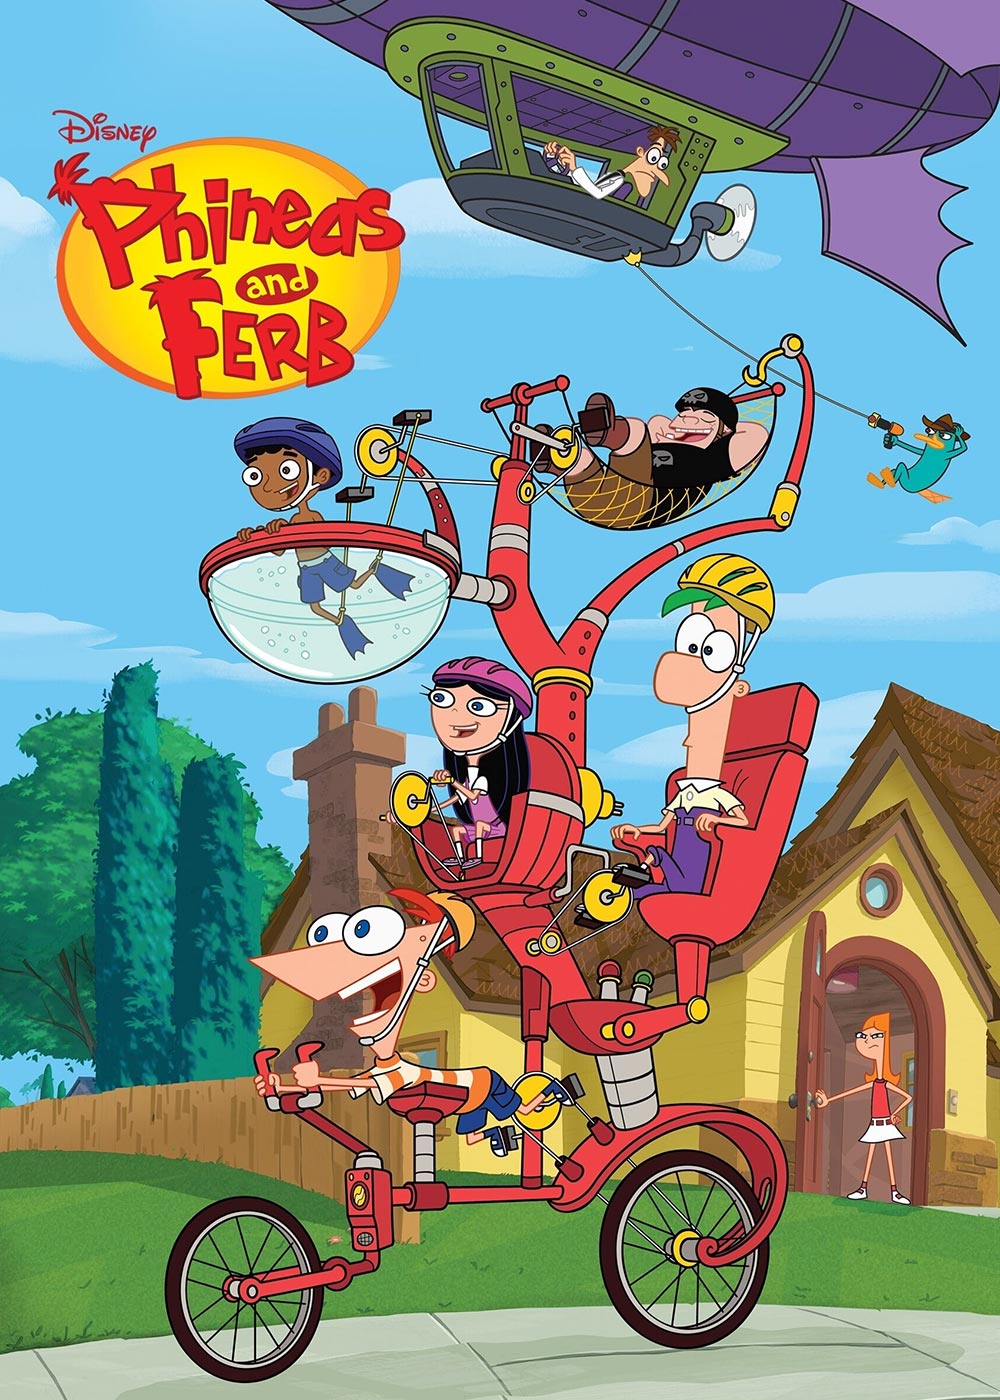 Phineas and Ferb Season 3